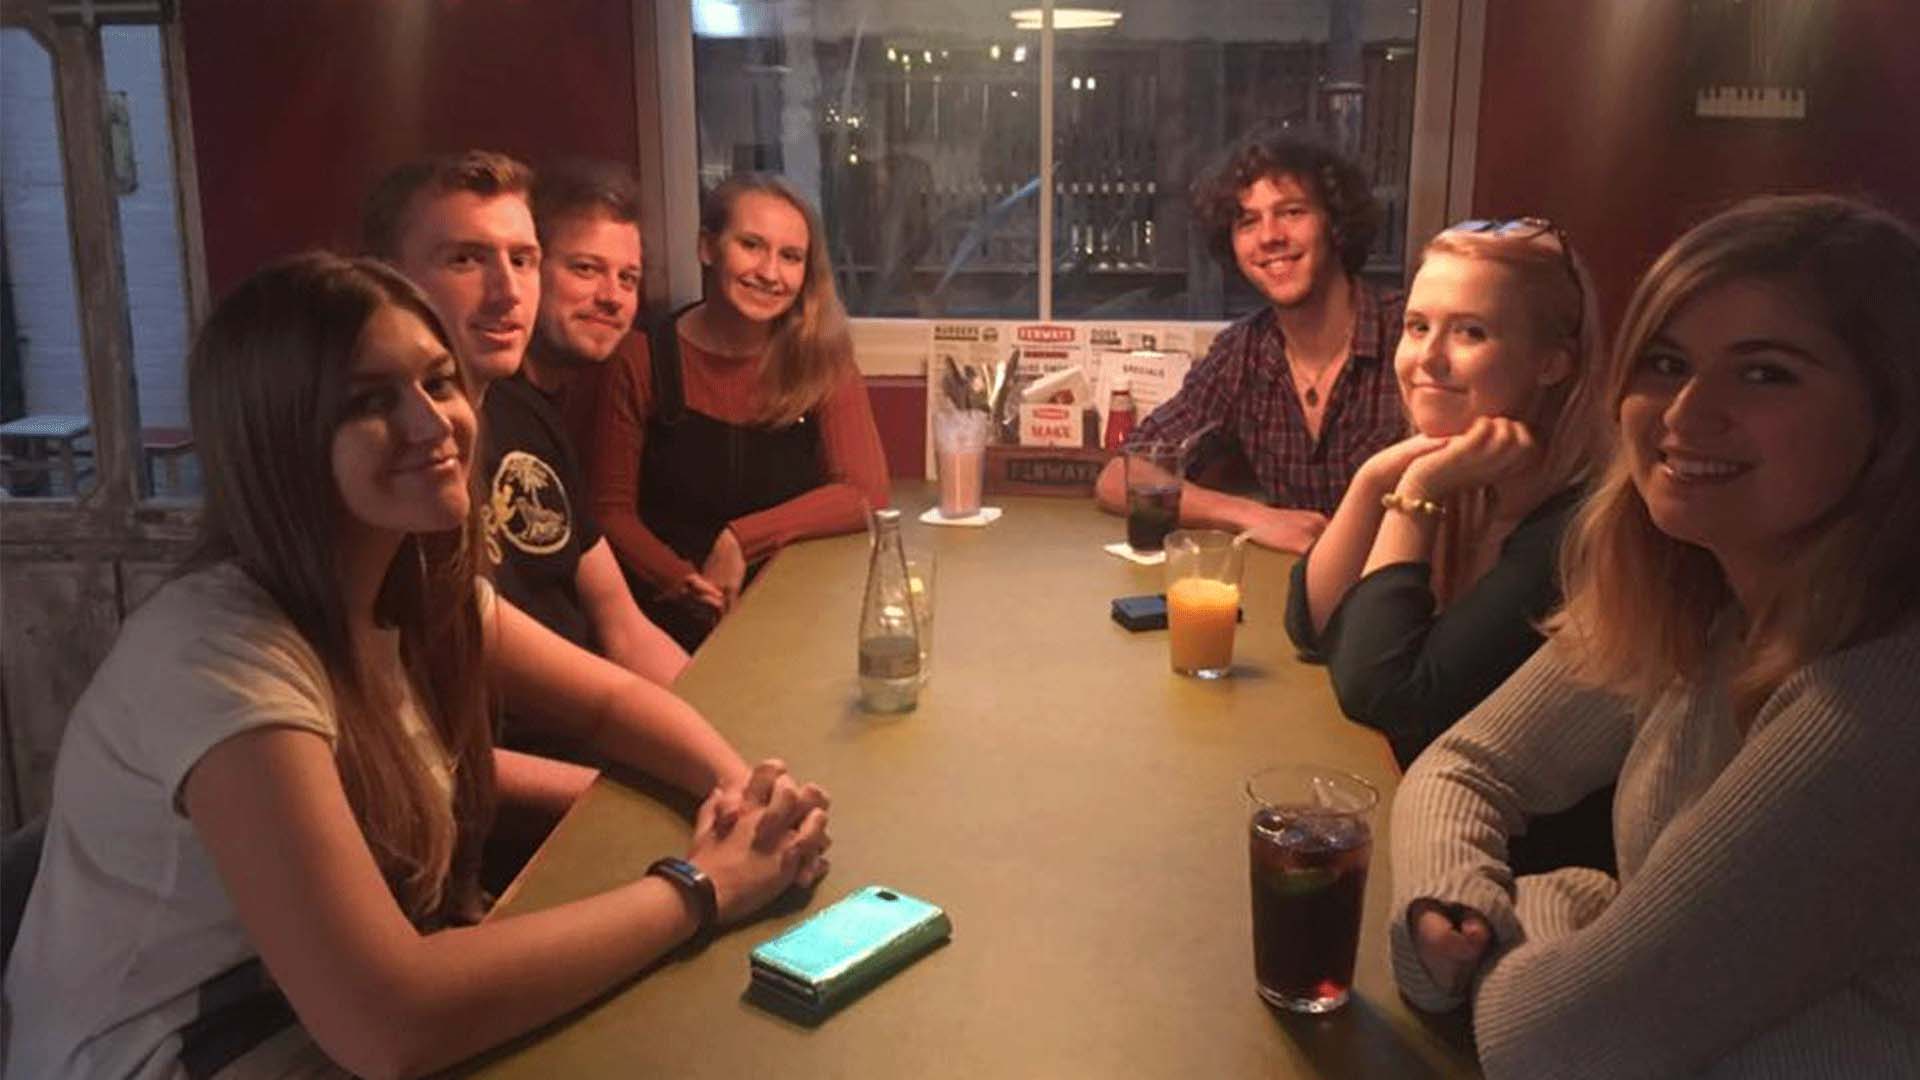 Hannah and six of her friends at a restaurant.  